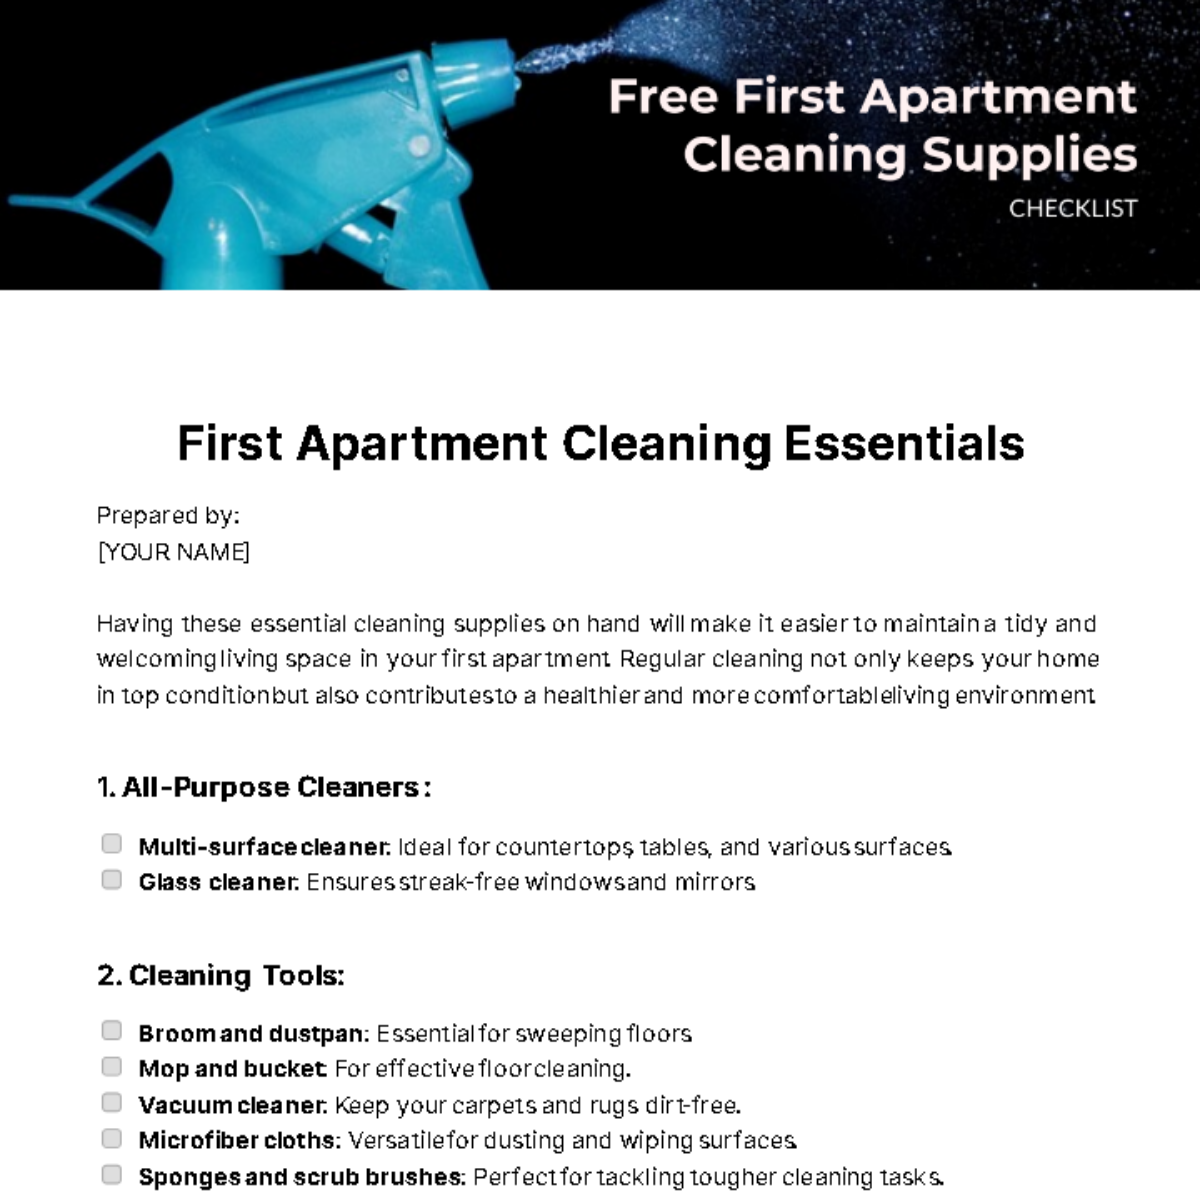 Free First Apartment Cleaning Supplies Checklist Template